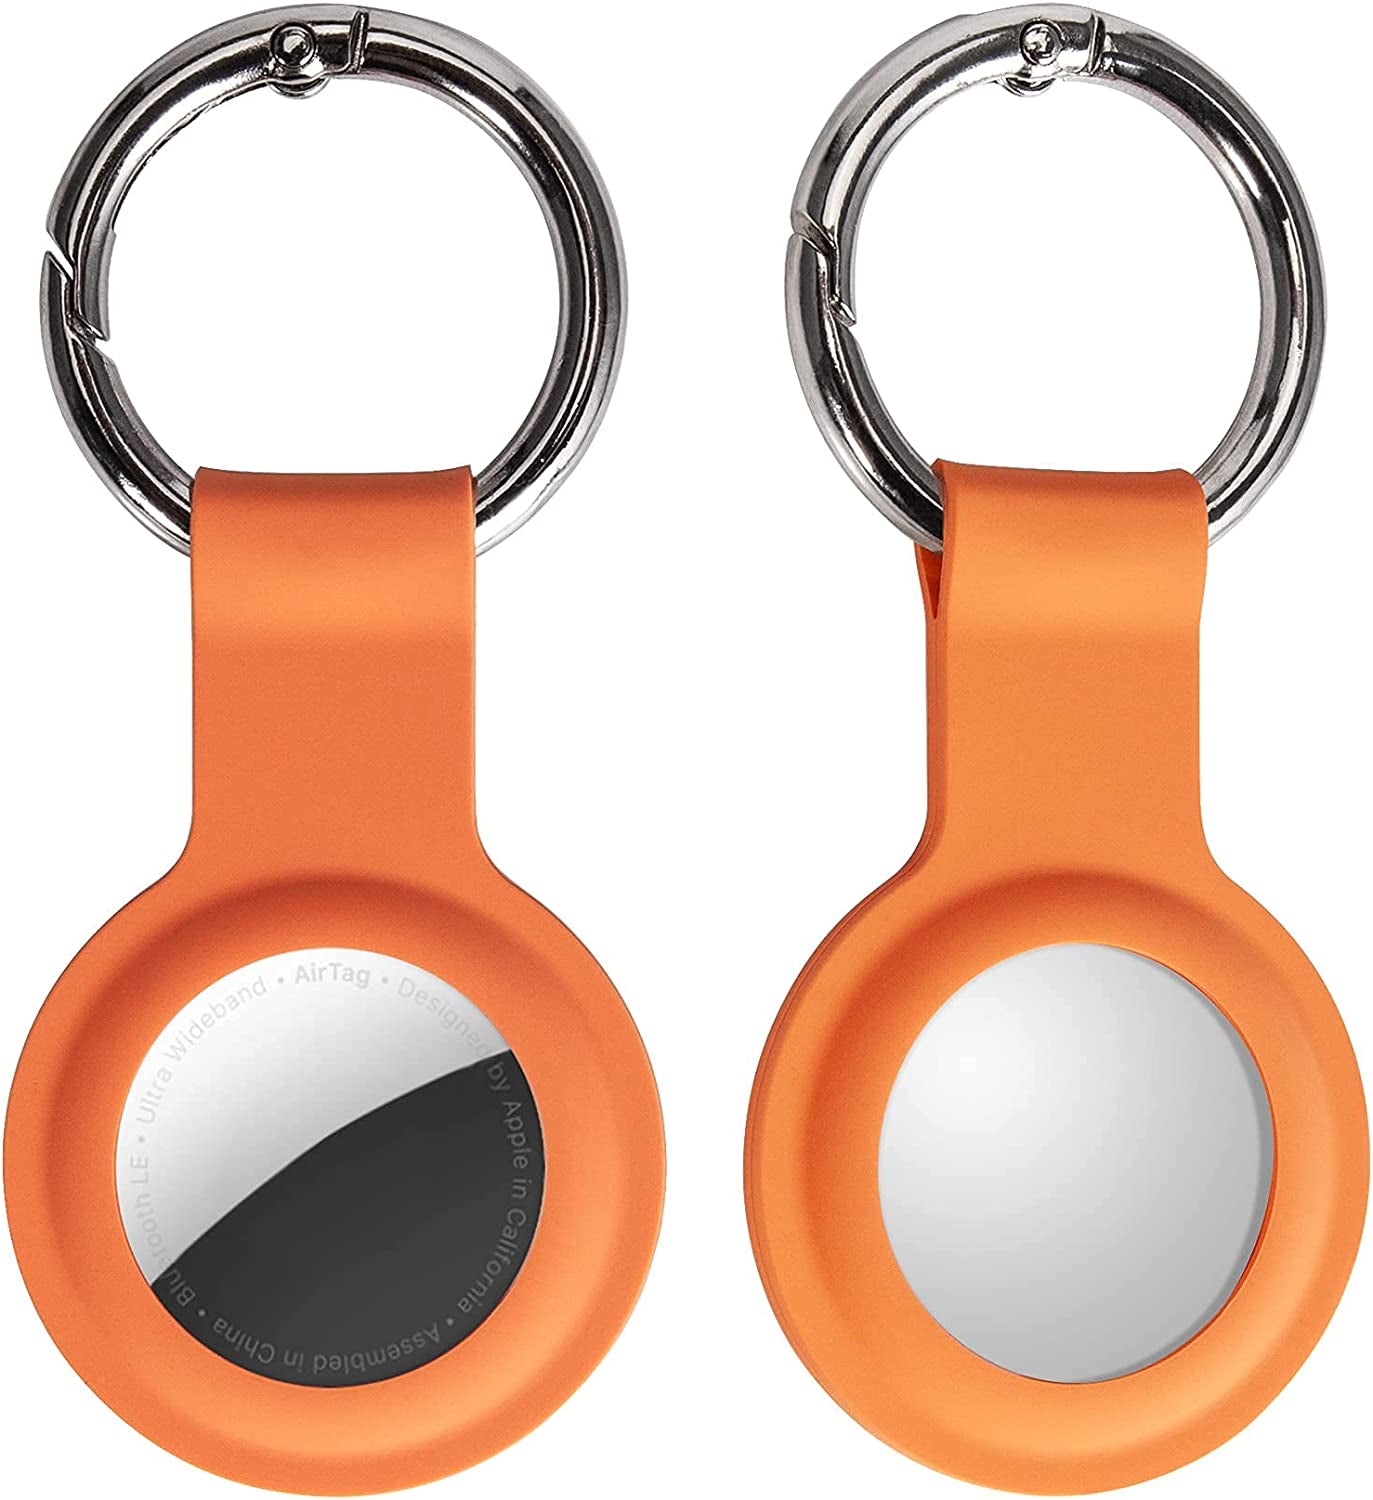 Silicone Case for Airtags 2021 Protective Cover Tracker/Locator with Keychain for Suitcases Bags Keys Pets - Orange